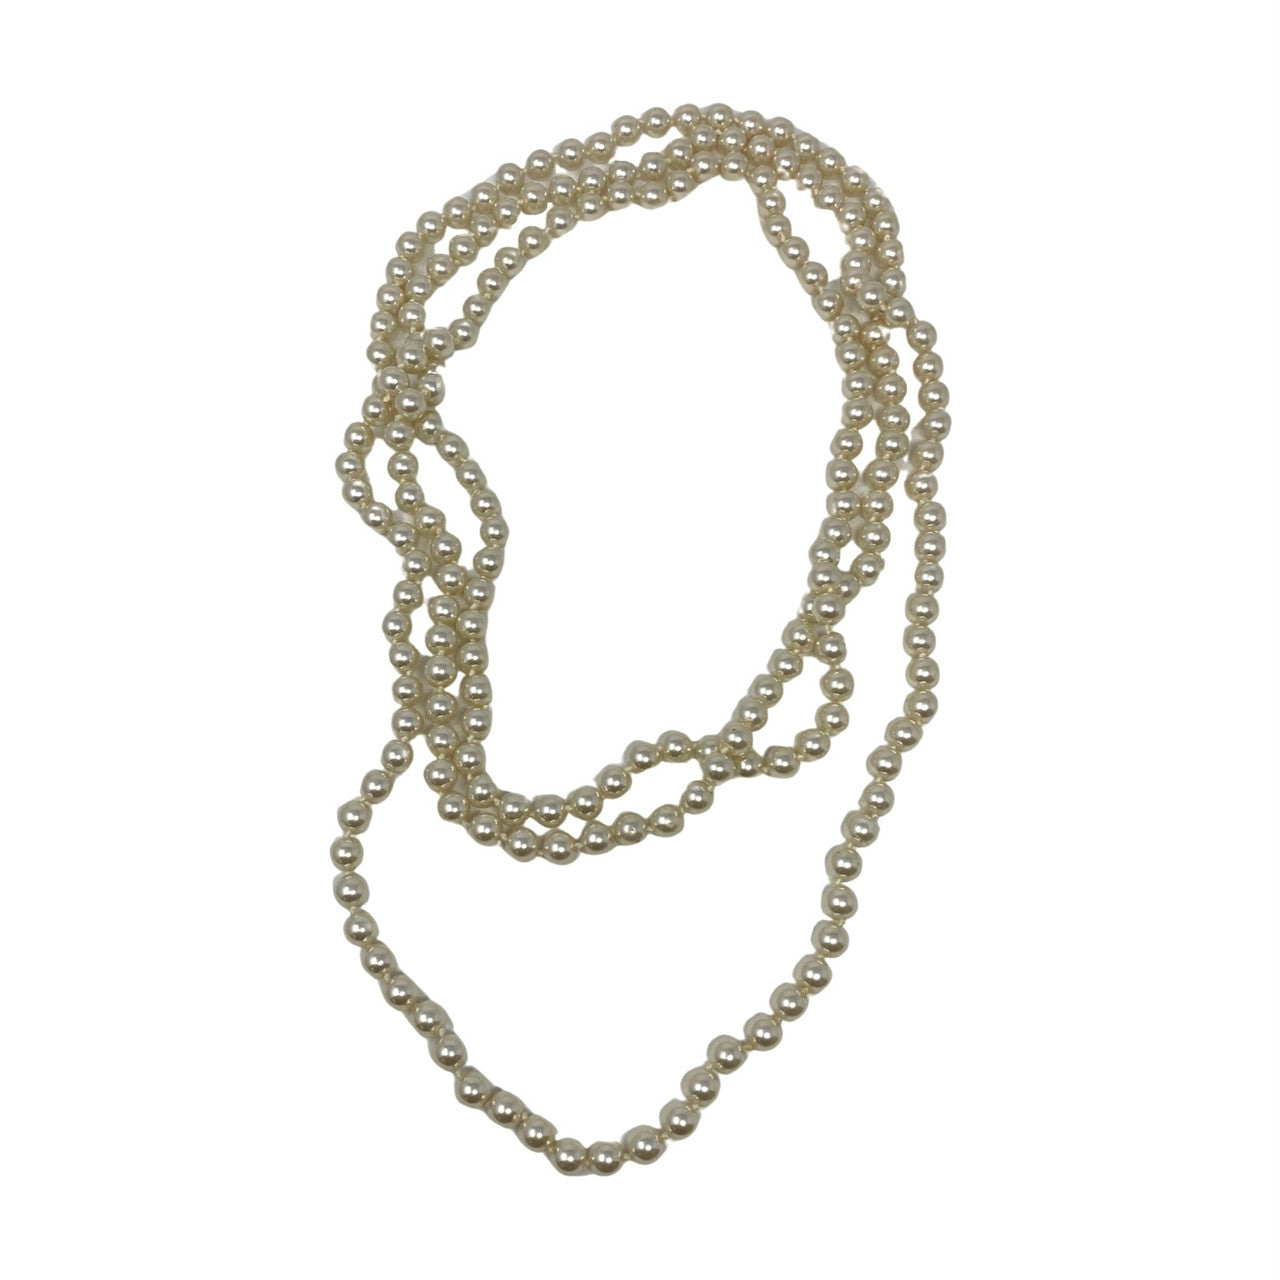 Costume Faux Pearl Long Necklace